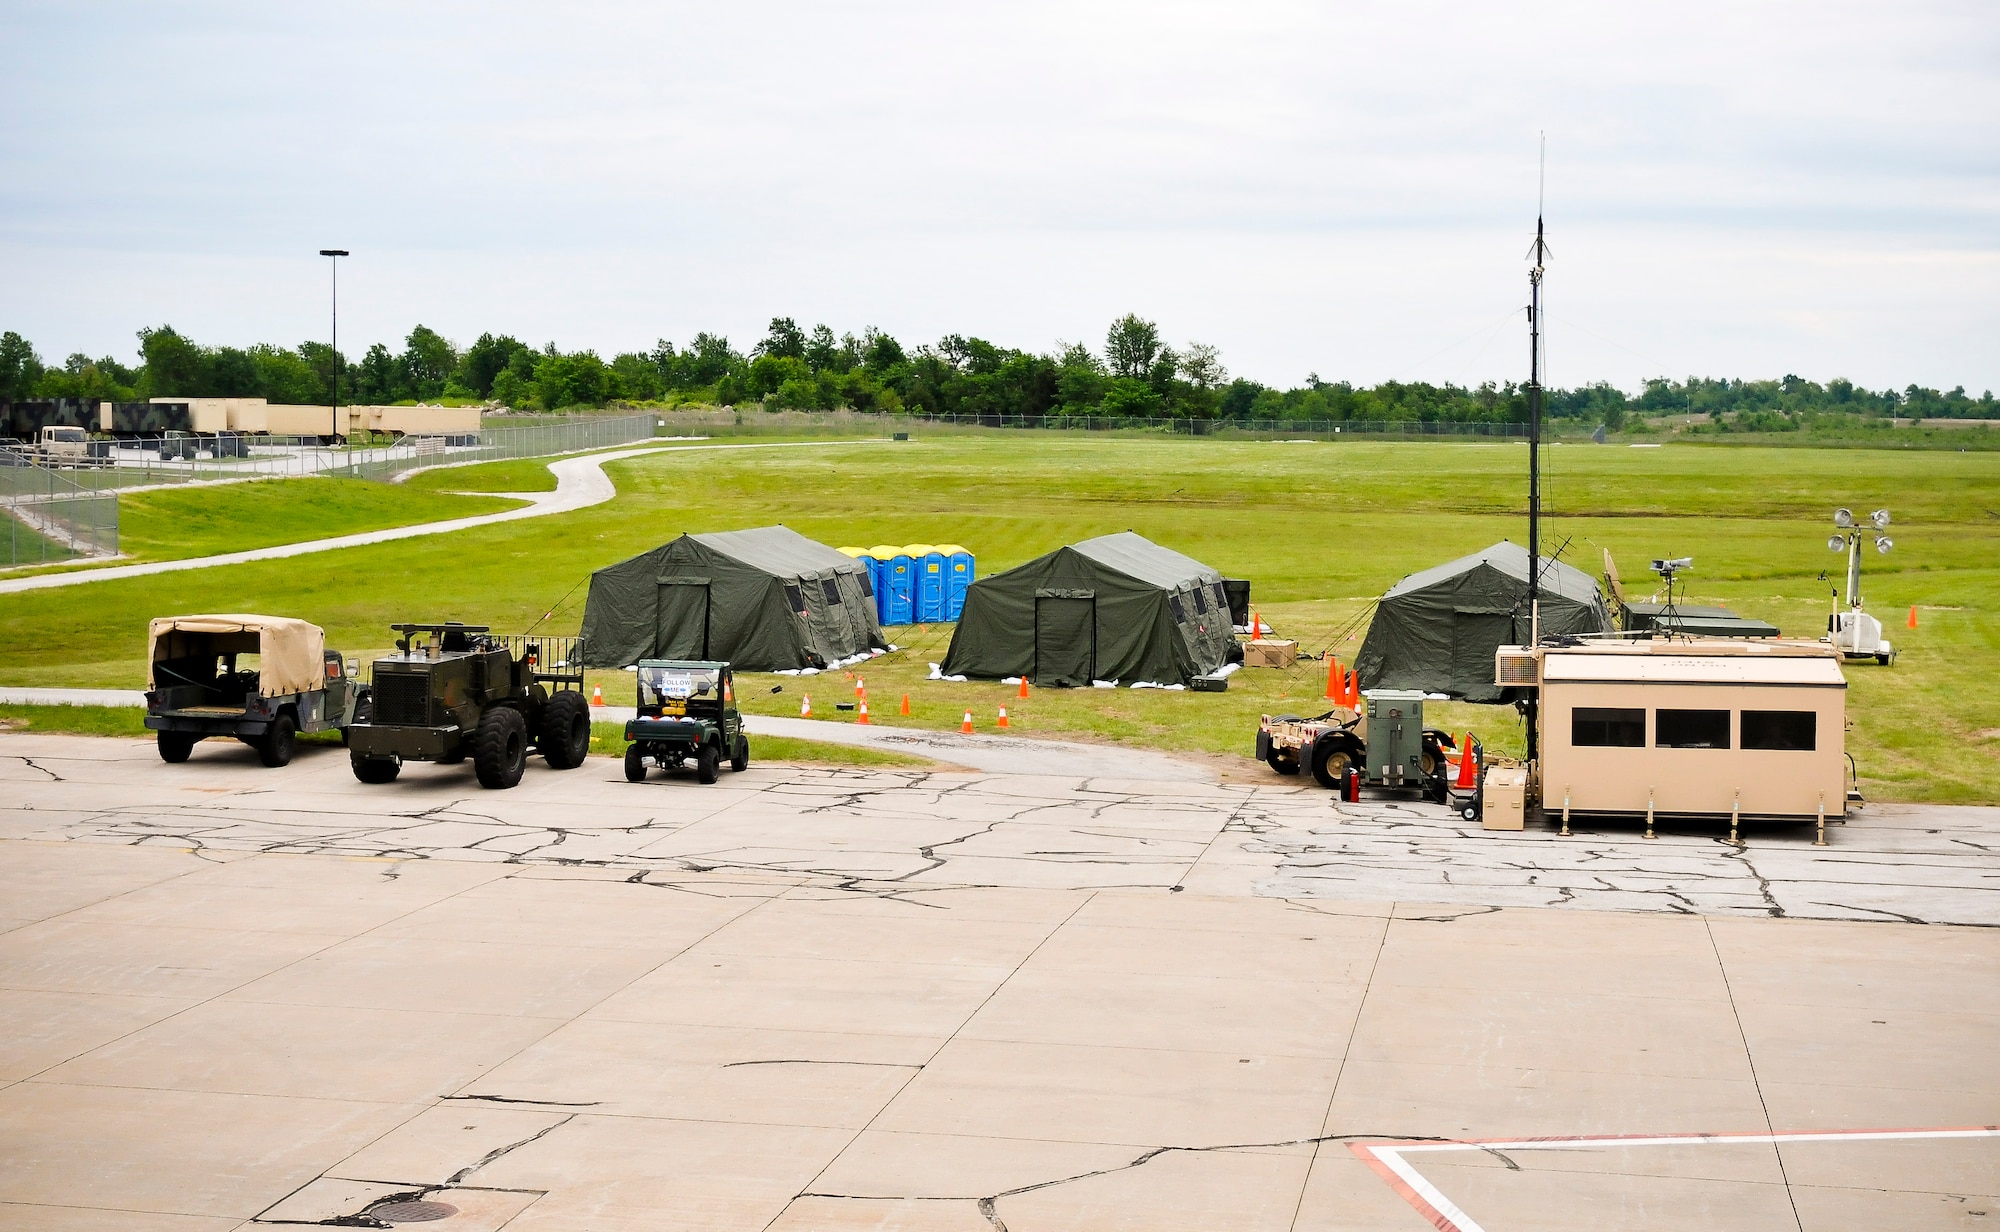 The 123rd Contingency Response Element’s command center for National Level Exercise 2011 is Located on the edge of the flight line at Springfield-Branson National Airport in Springfield, Mo. The CRE can land at a non-functional airport, secure a perimeter around the airfield, and set up a command center in which they can start directing other aircraft to land. National Level Exercise 2011 is based on a scenario involving a massive earthquake along the New Madrid fault line, requiring extensive aeromedical evacuation of injured patients. The 123rd CRE was responsible for establishing an initial-response air hub in Springfield during the exercise. (U.S. Air Force photo by Senior Airman Maxwell Rechel)